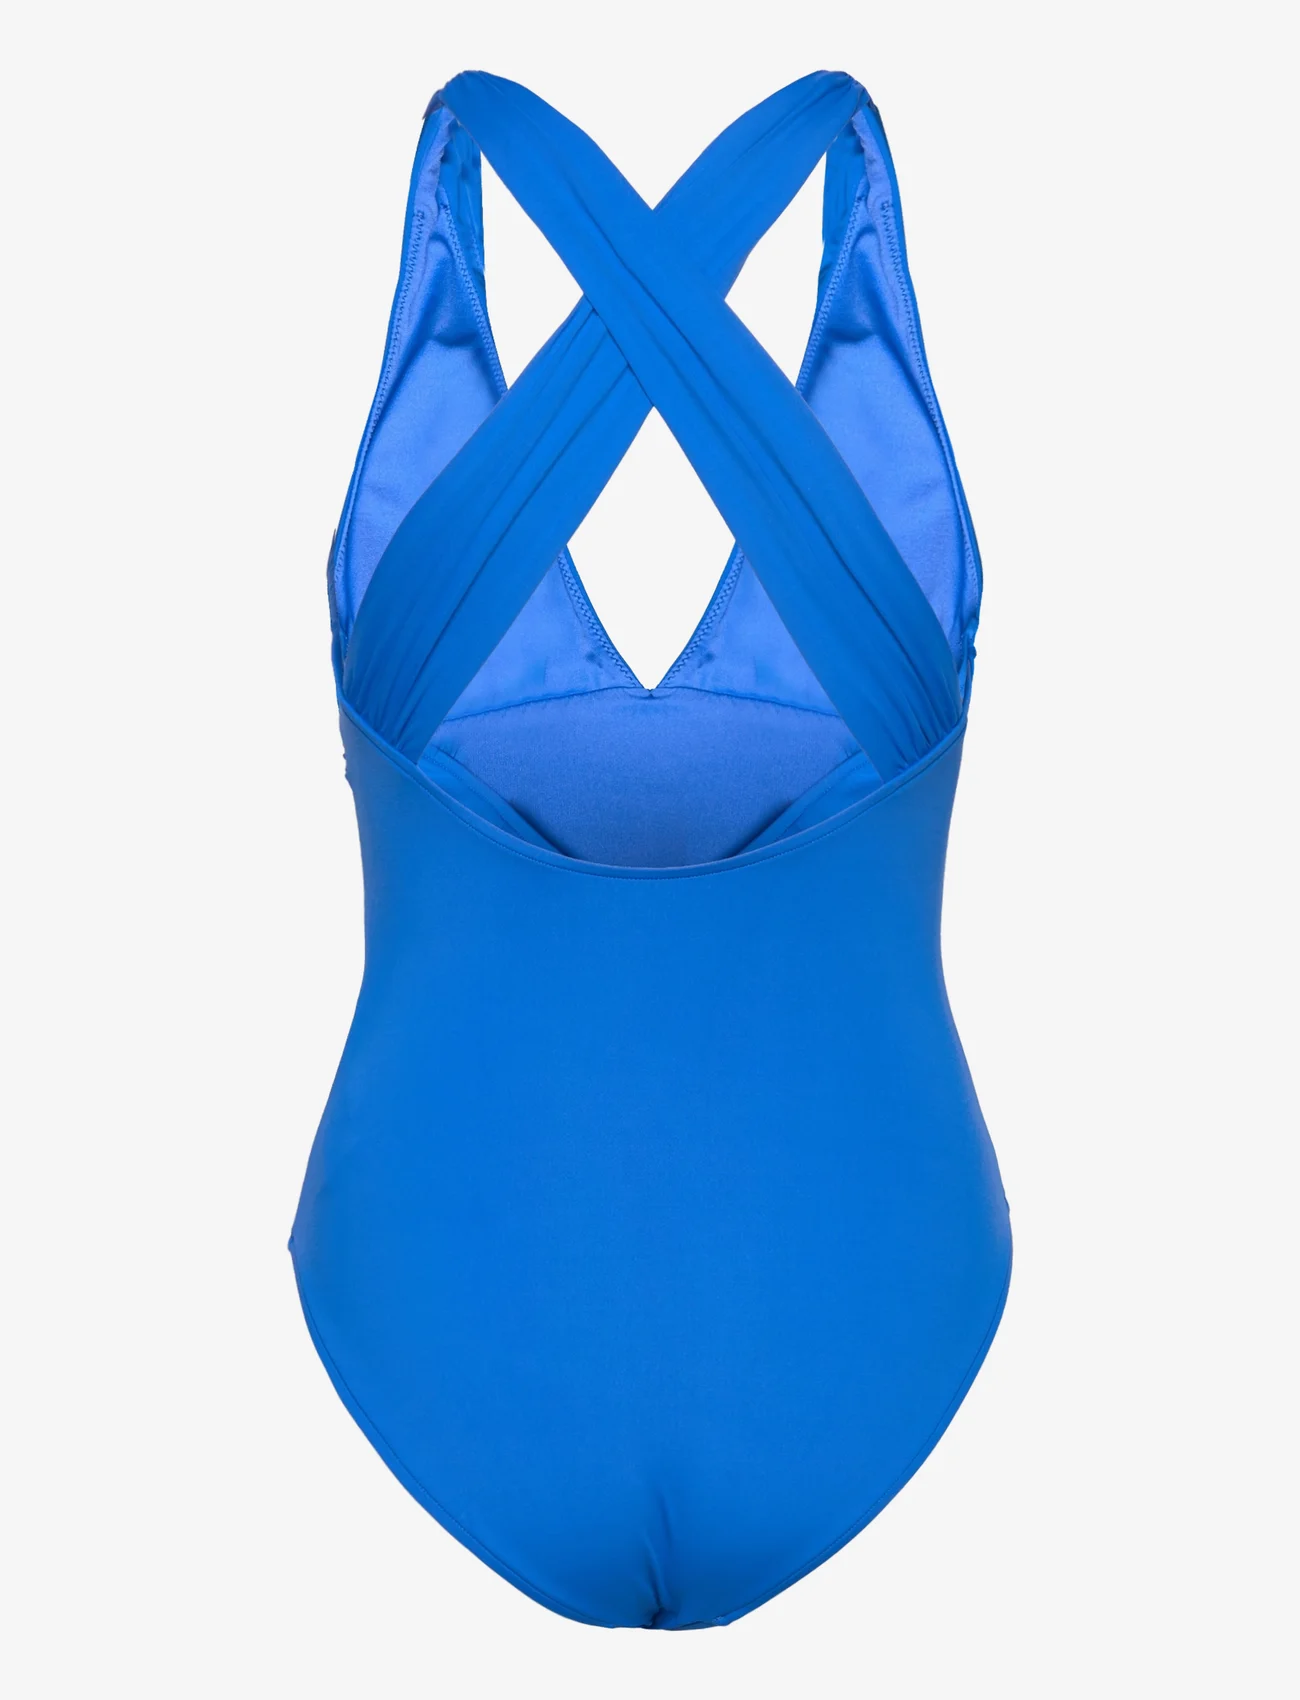 Seafolly - S.Collective Cross Back One Piece - badedragter - azure - 1